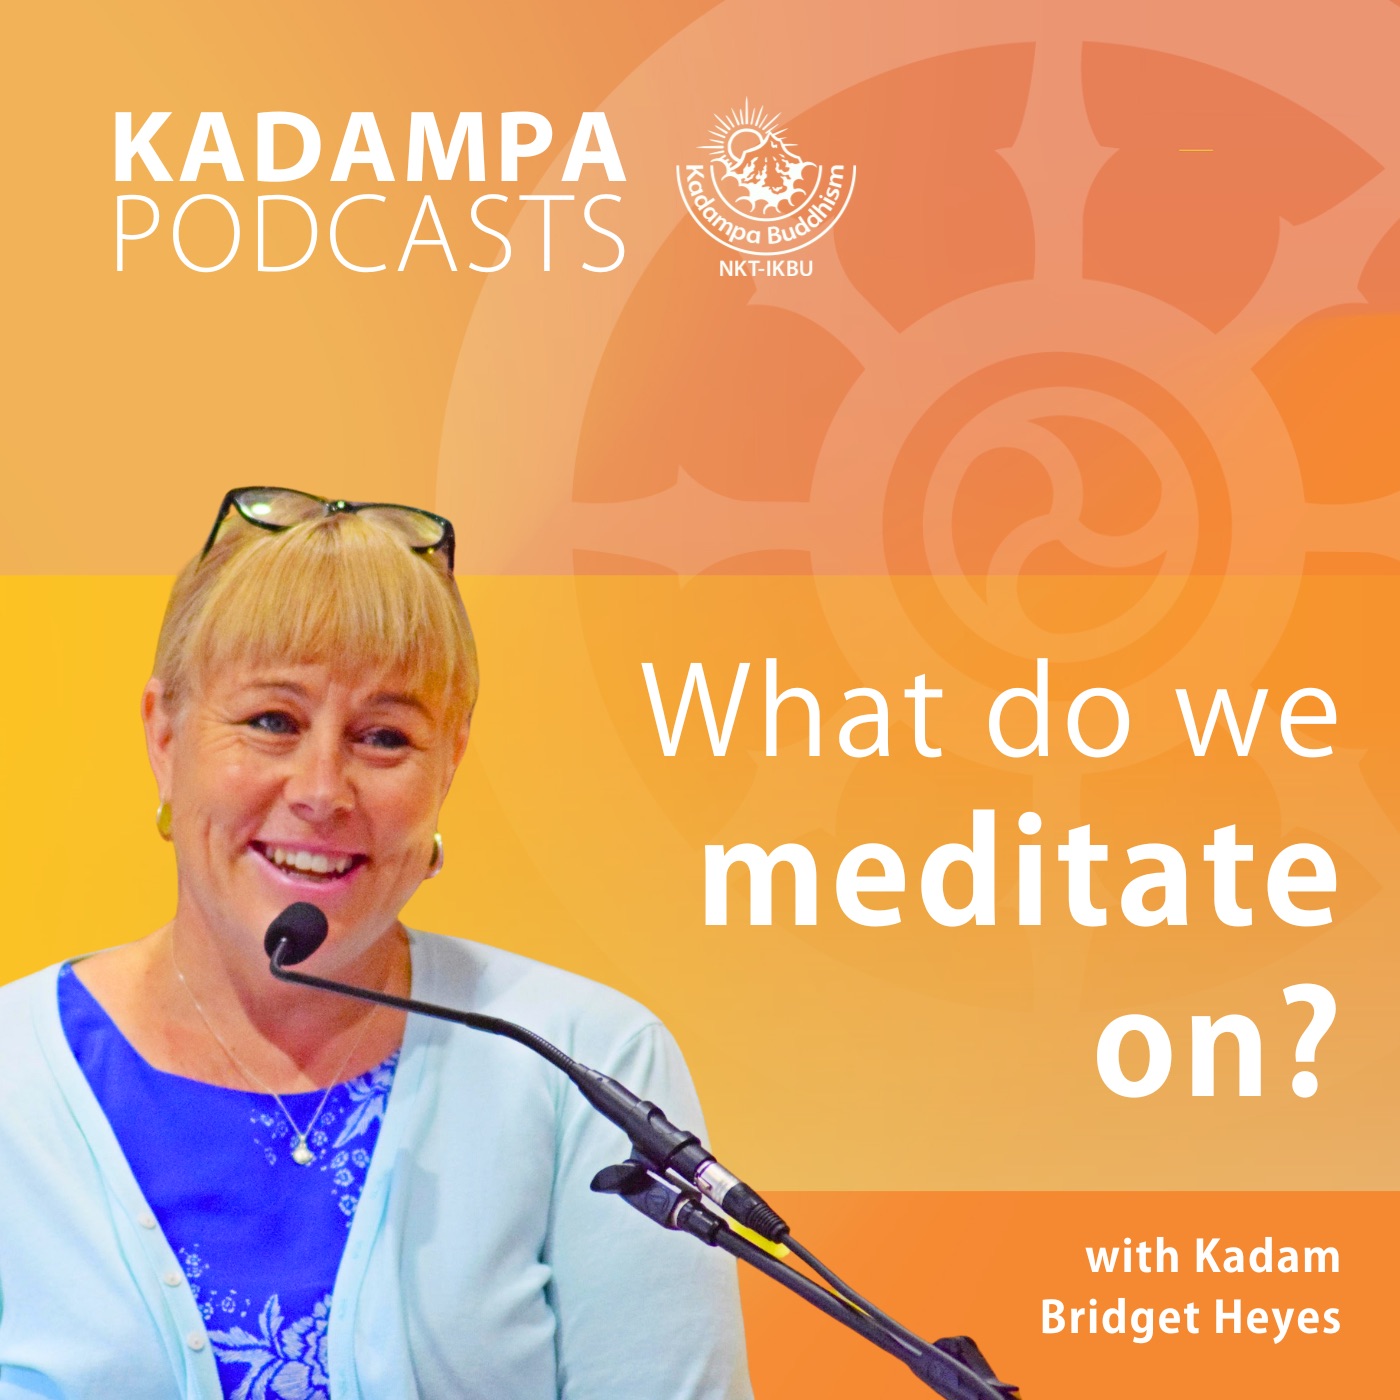 What do we meditate on?